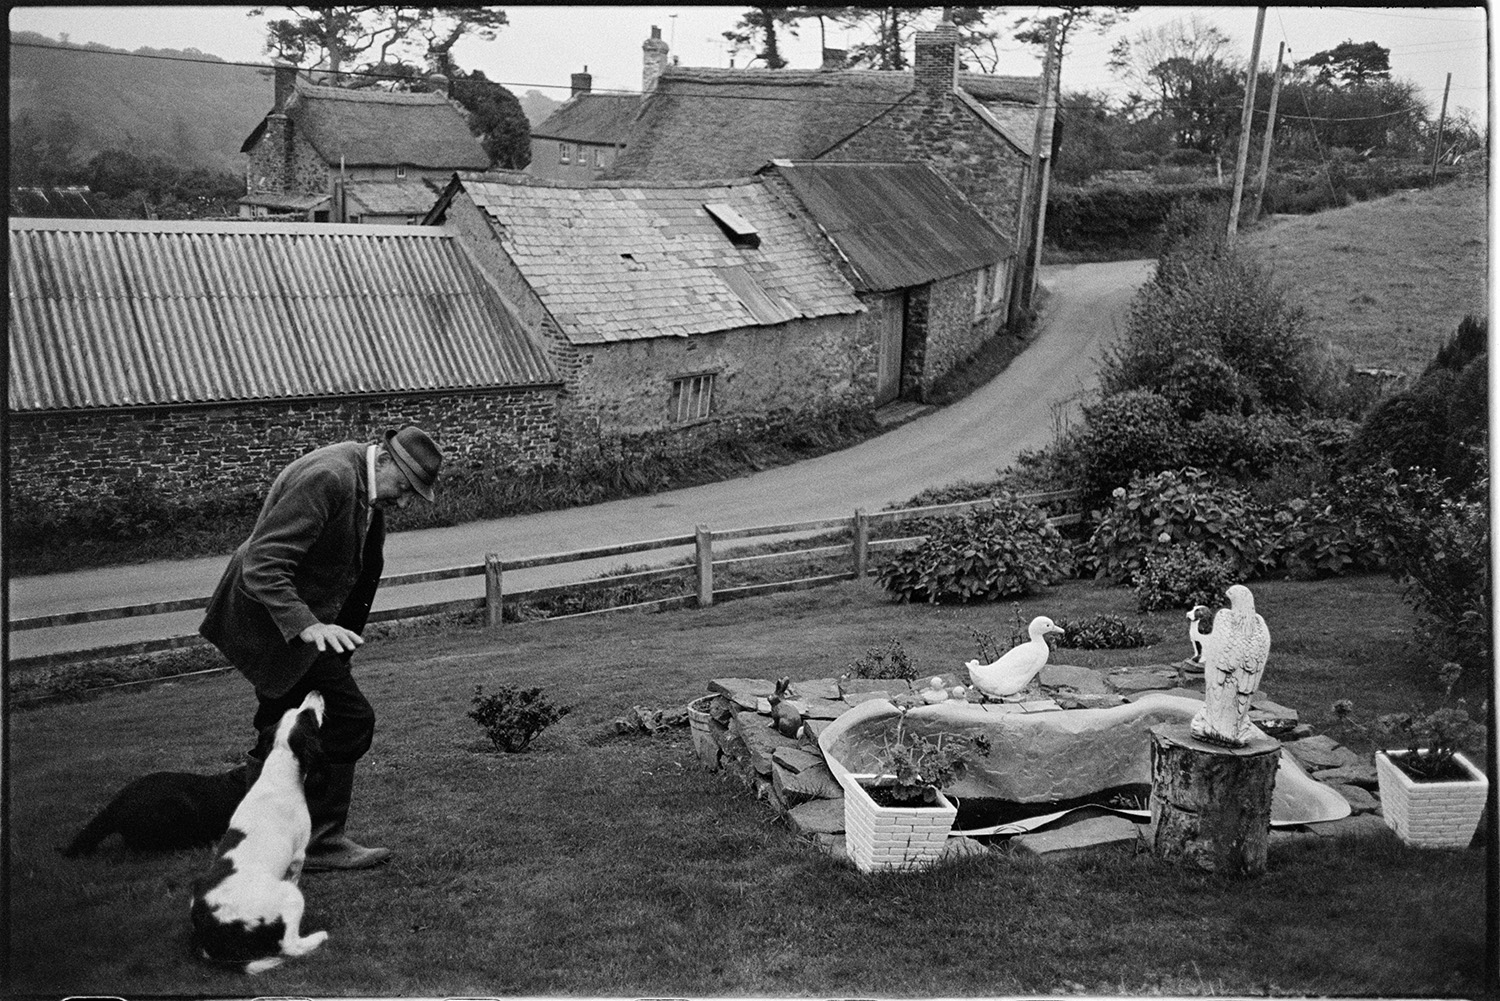 Ornamental garden with duck and dog, real dogs too! 
[Sidney Bryant in his garden in Merton with two dogs. A pond feature with garden ornaments and plants in pots can be seen in the garden. Farm buildings are also visible in the background.]